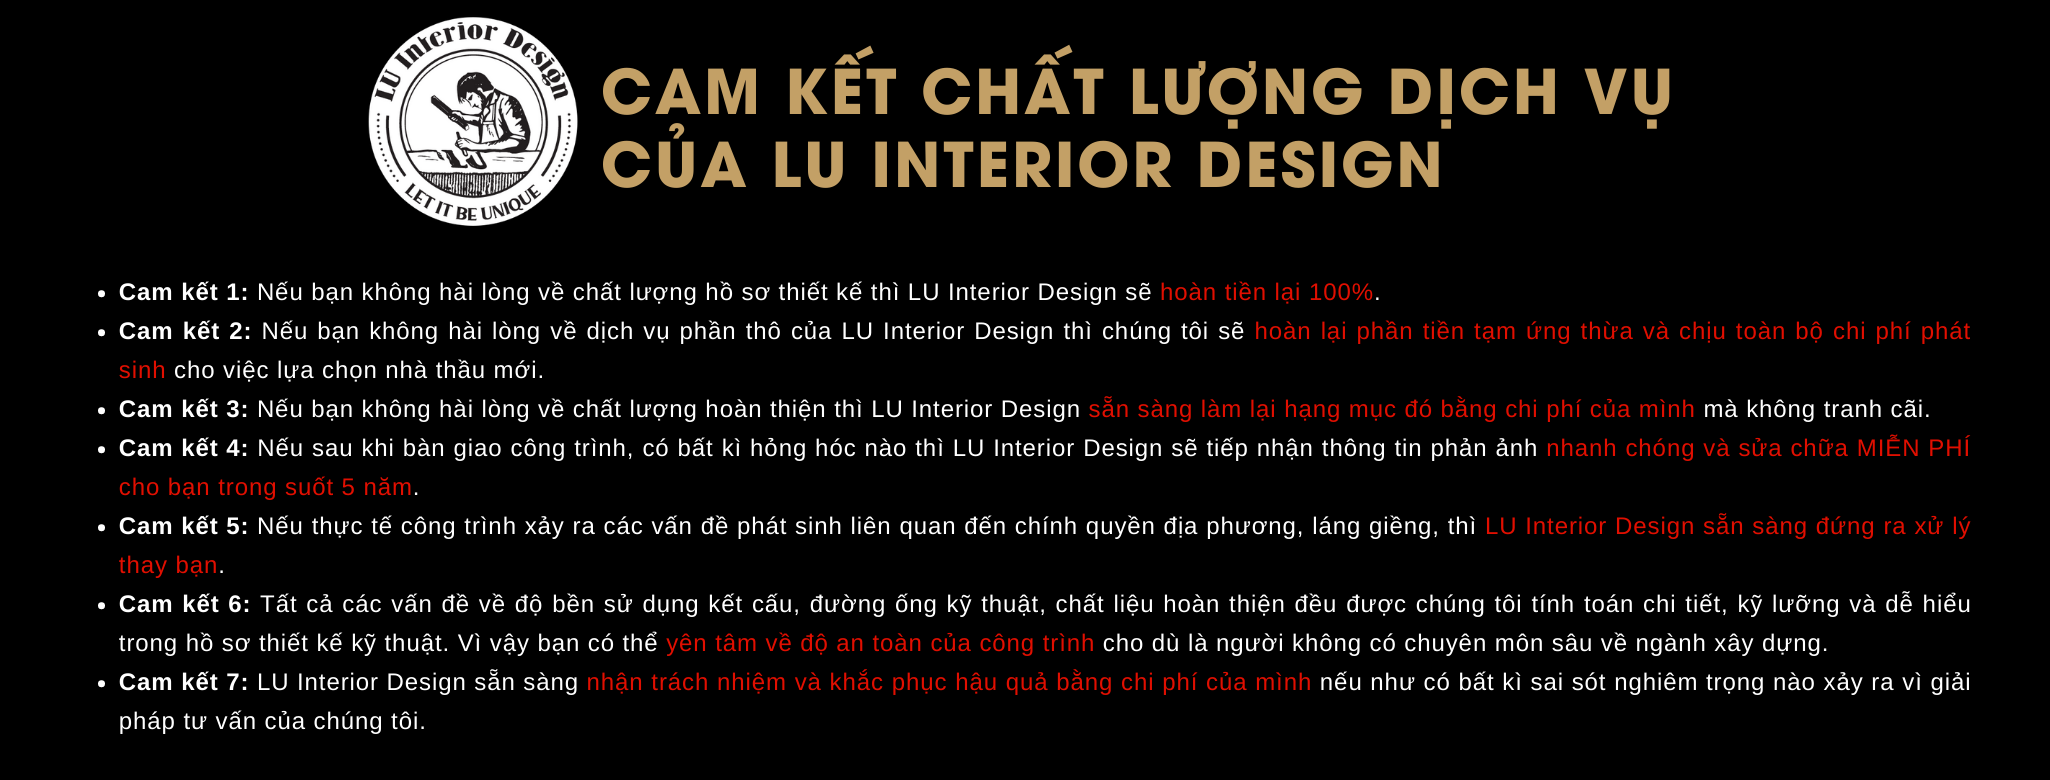 ludesign-Cam-ket chat-luong-dich-vu